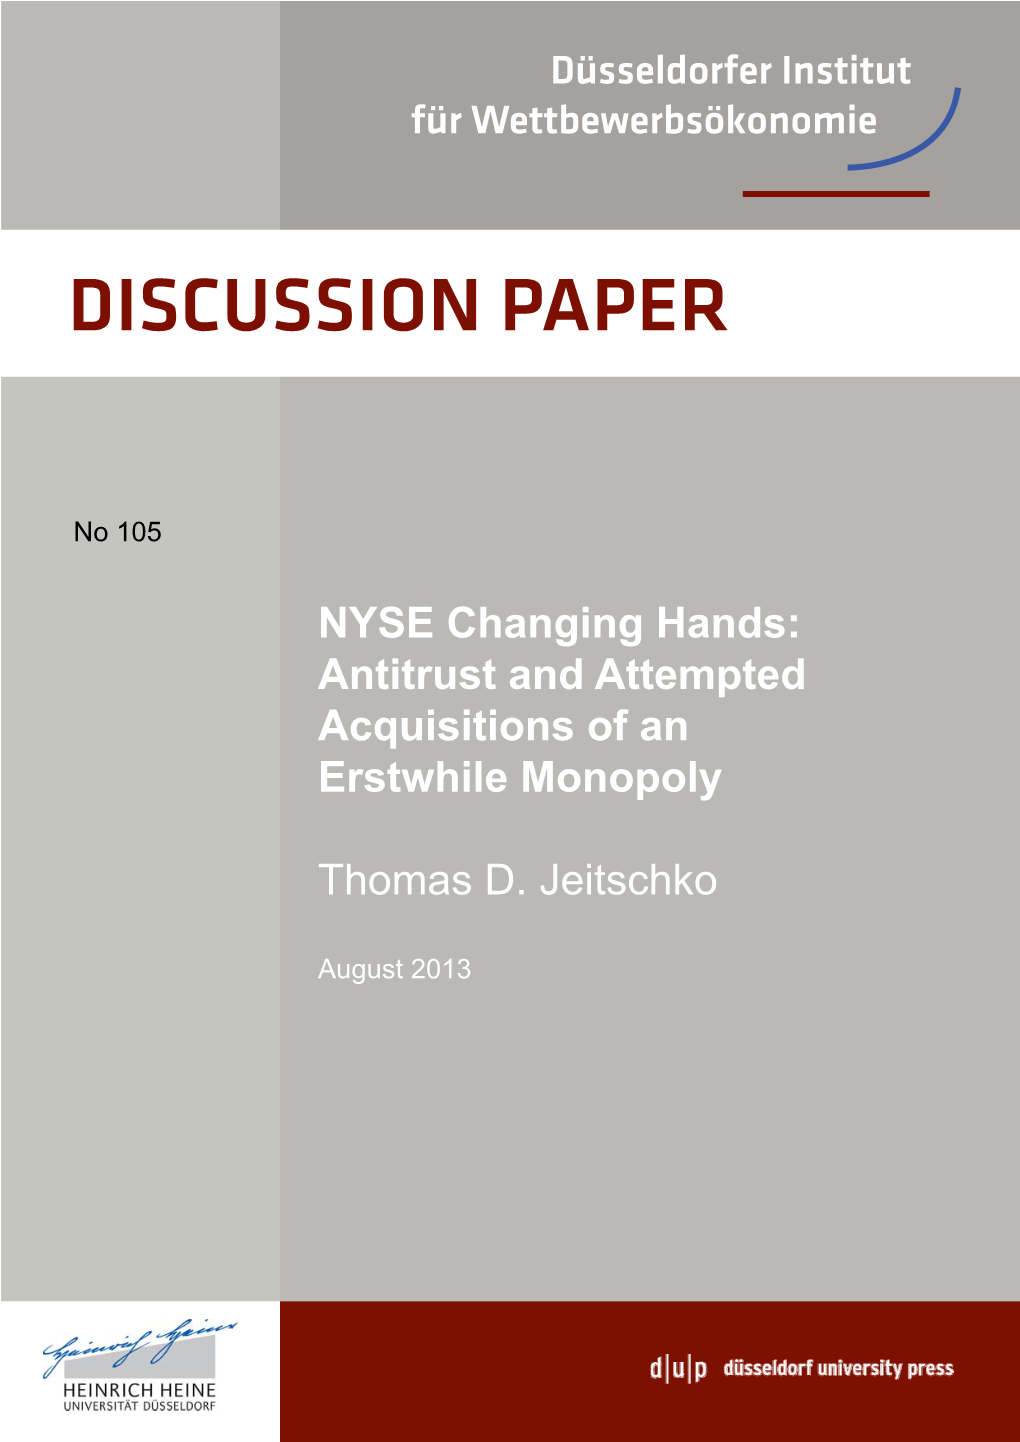 NYSE Changing Hands: Antitrust and Attempted Acquisitions of an Erstwhile Monopoly